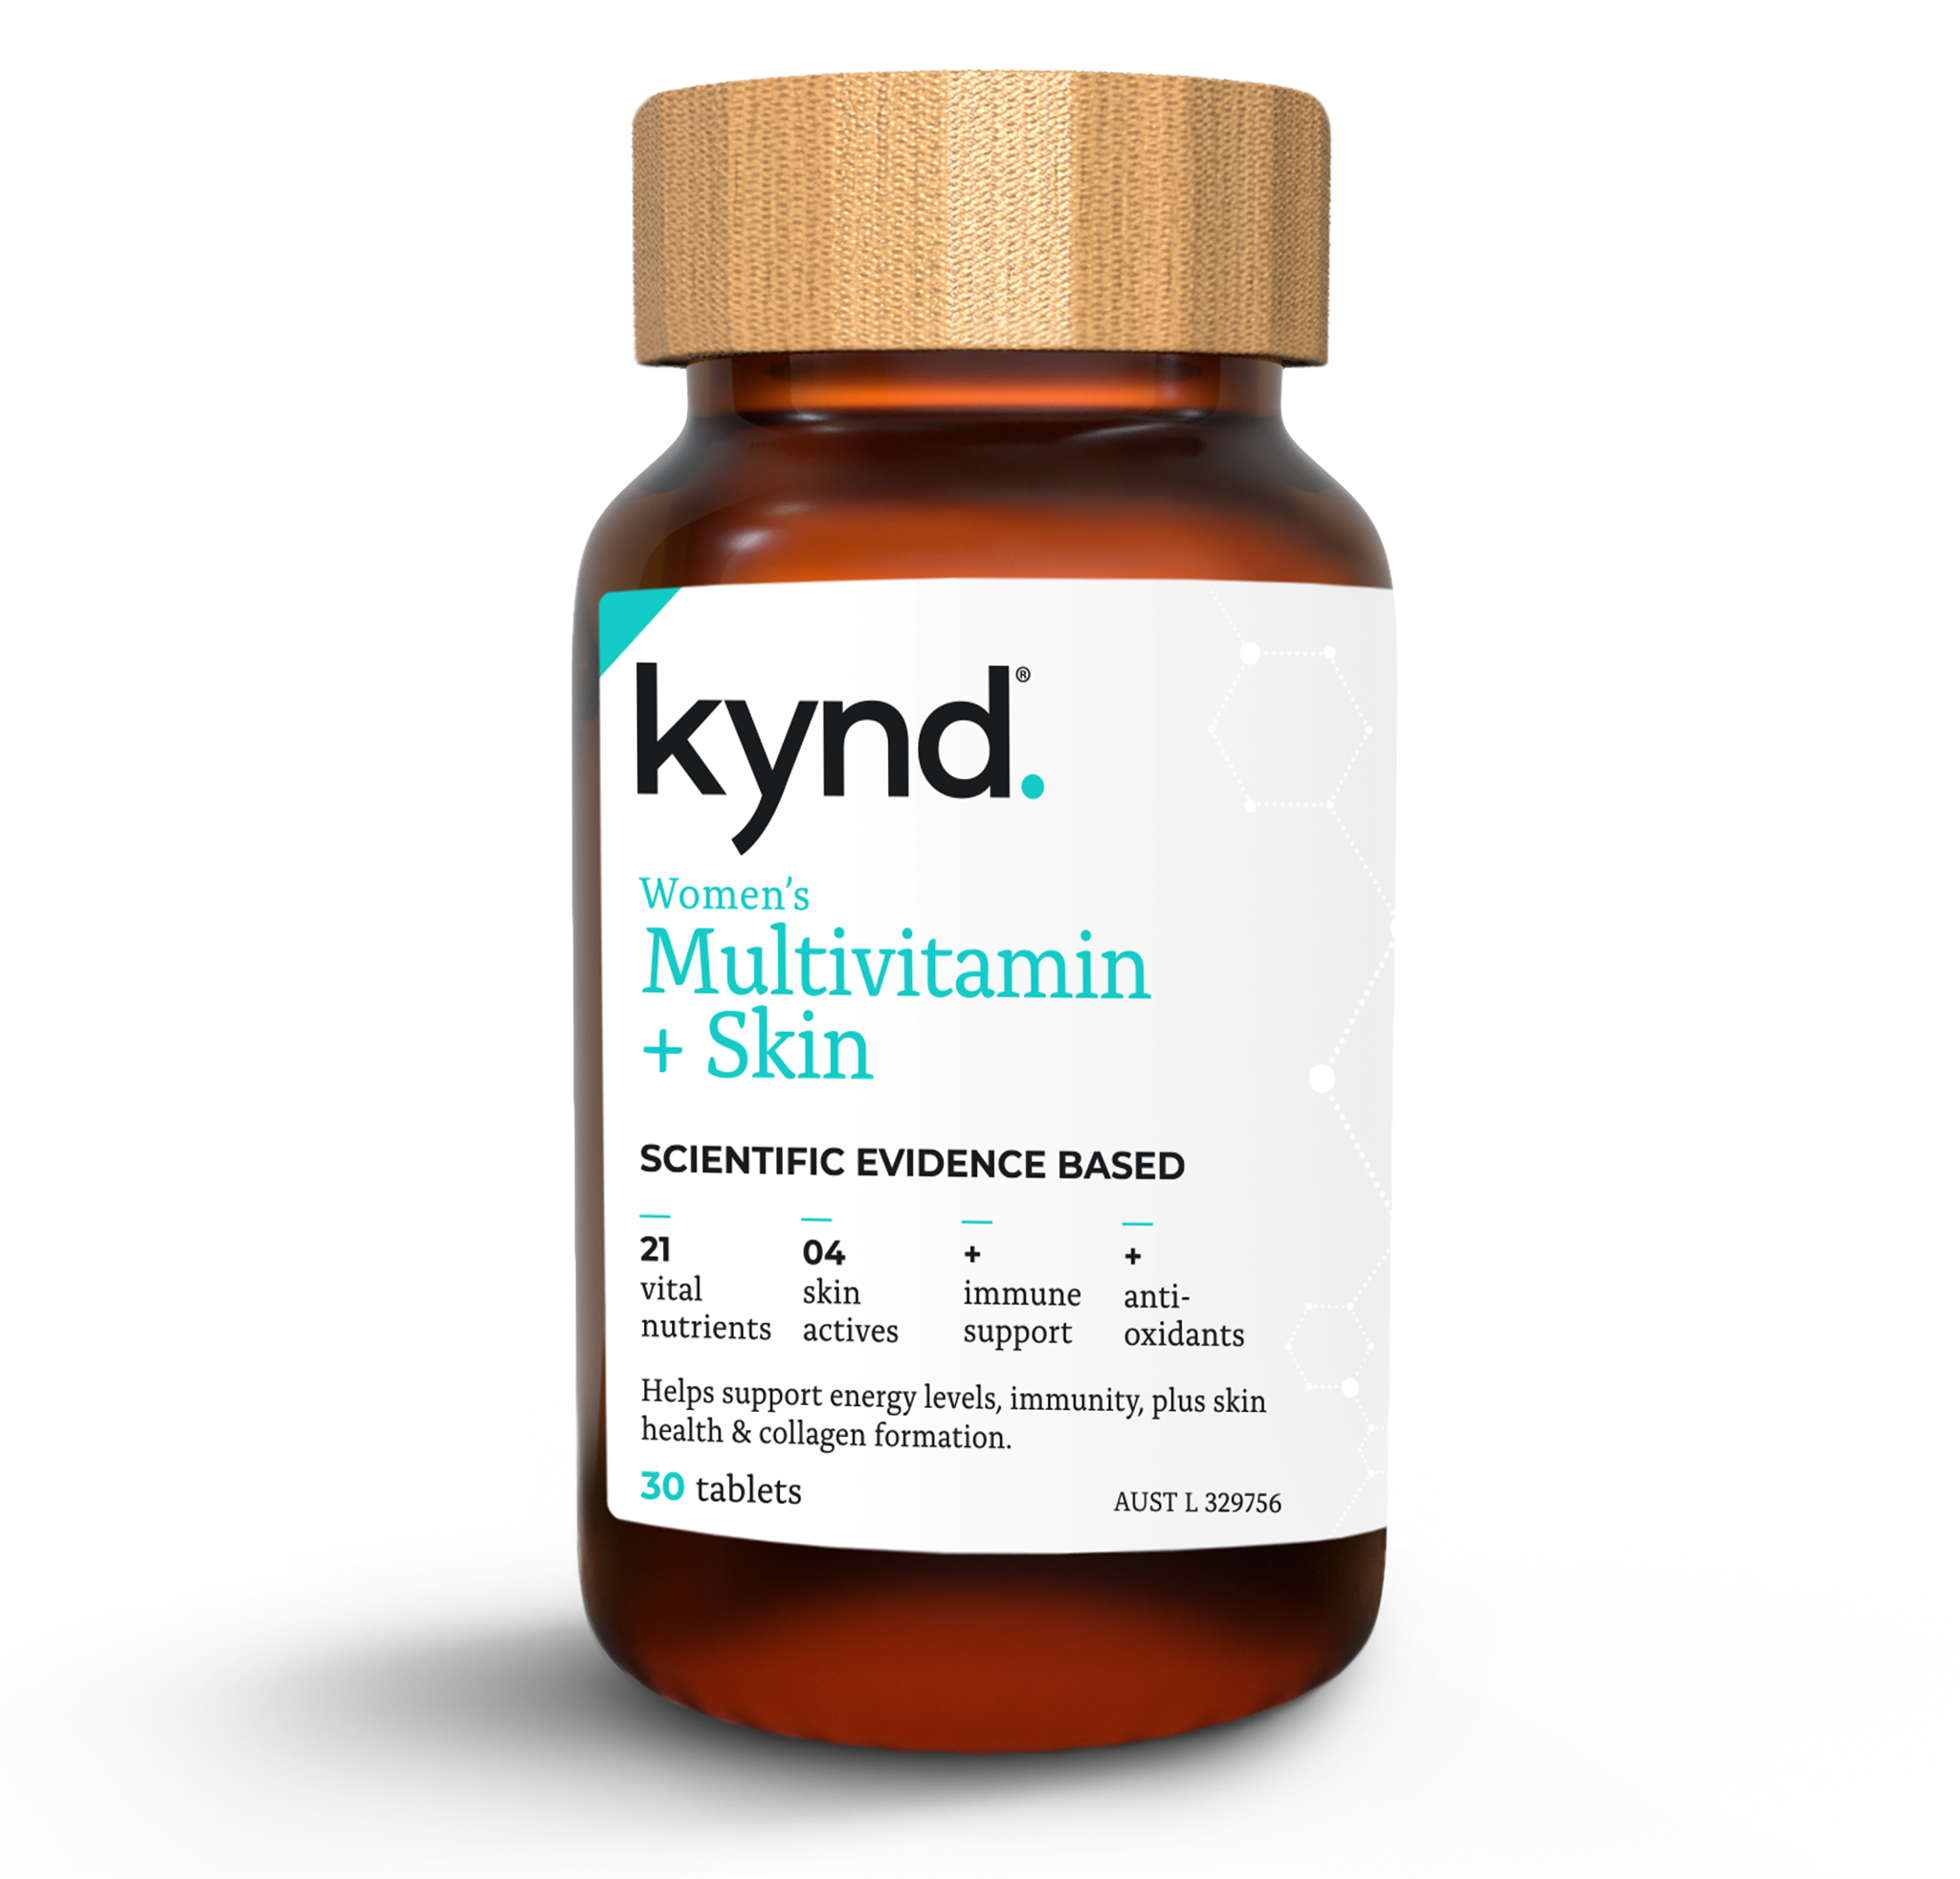 Kynd Women's Multivitamin + Skin | Supplement | Vitamin | Mineral | Scientific Evidence Based - Energy Levels, Immunity and Collagen